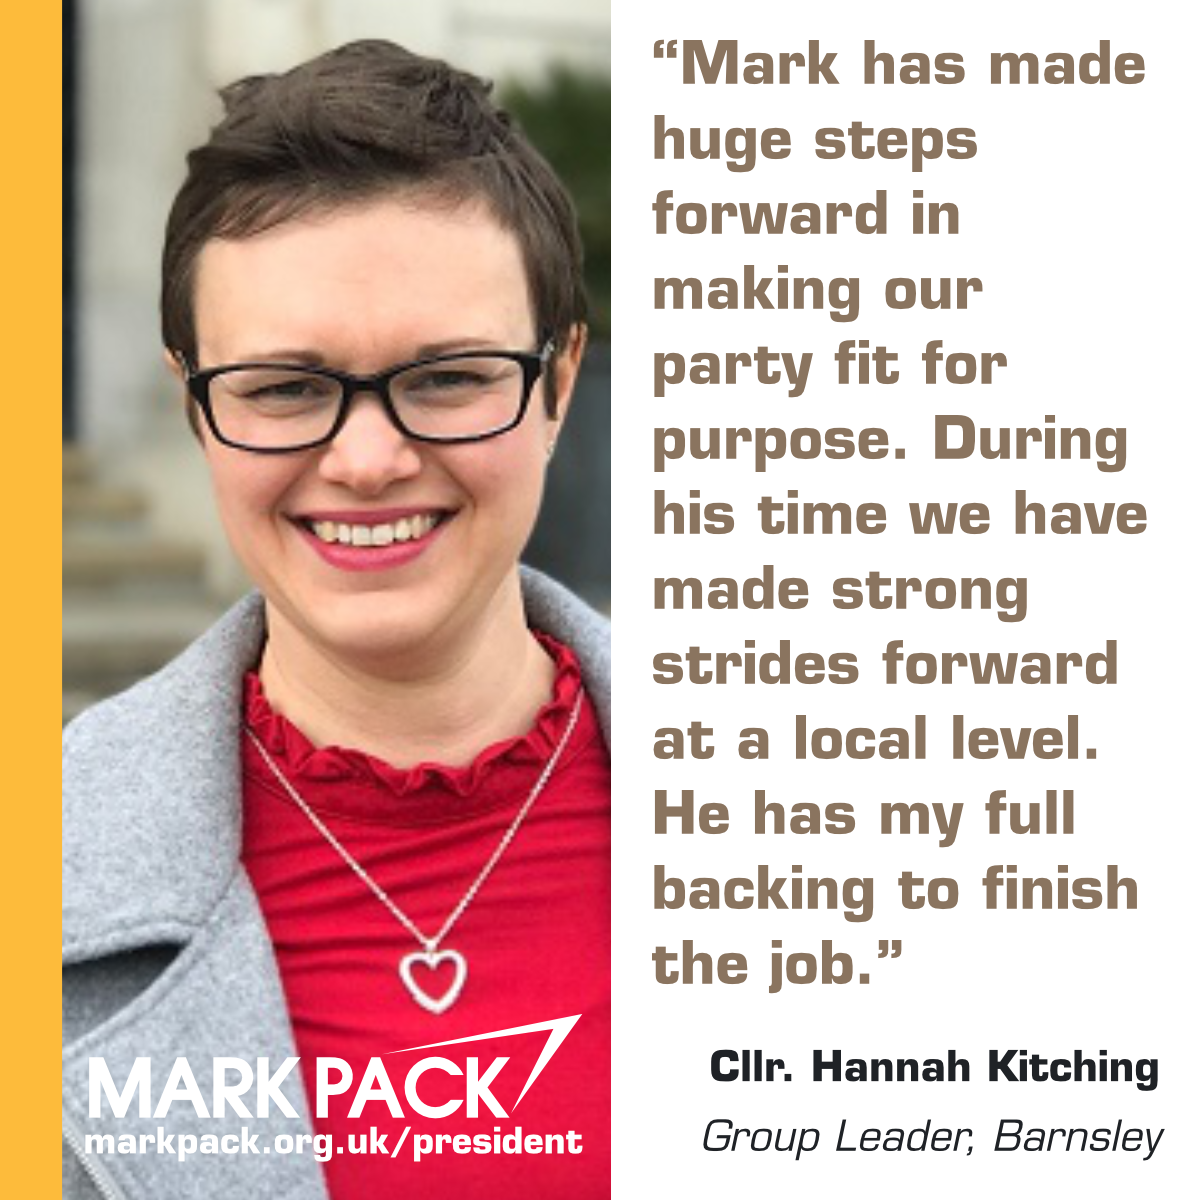 "Mark has made huge steps forward in making our party fit for purpose. During his time we have made strong strides forward at a local level and in by-elections. He has my full backing to finish the job" - Cllr Hannah Kitching, Group Leader, Barnsley